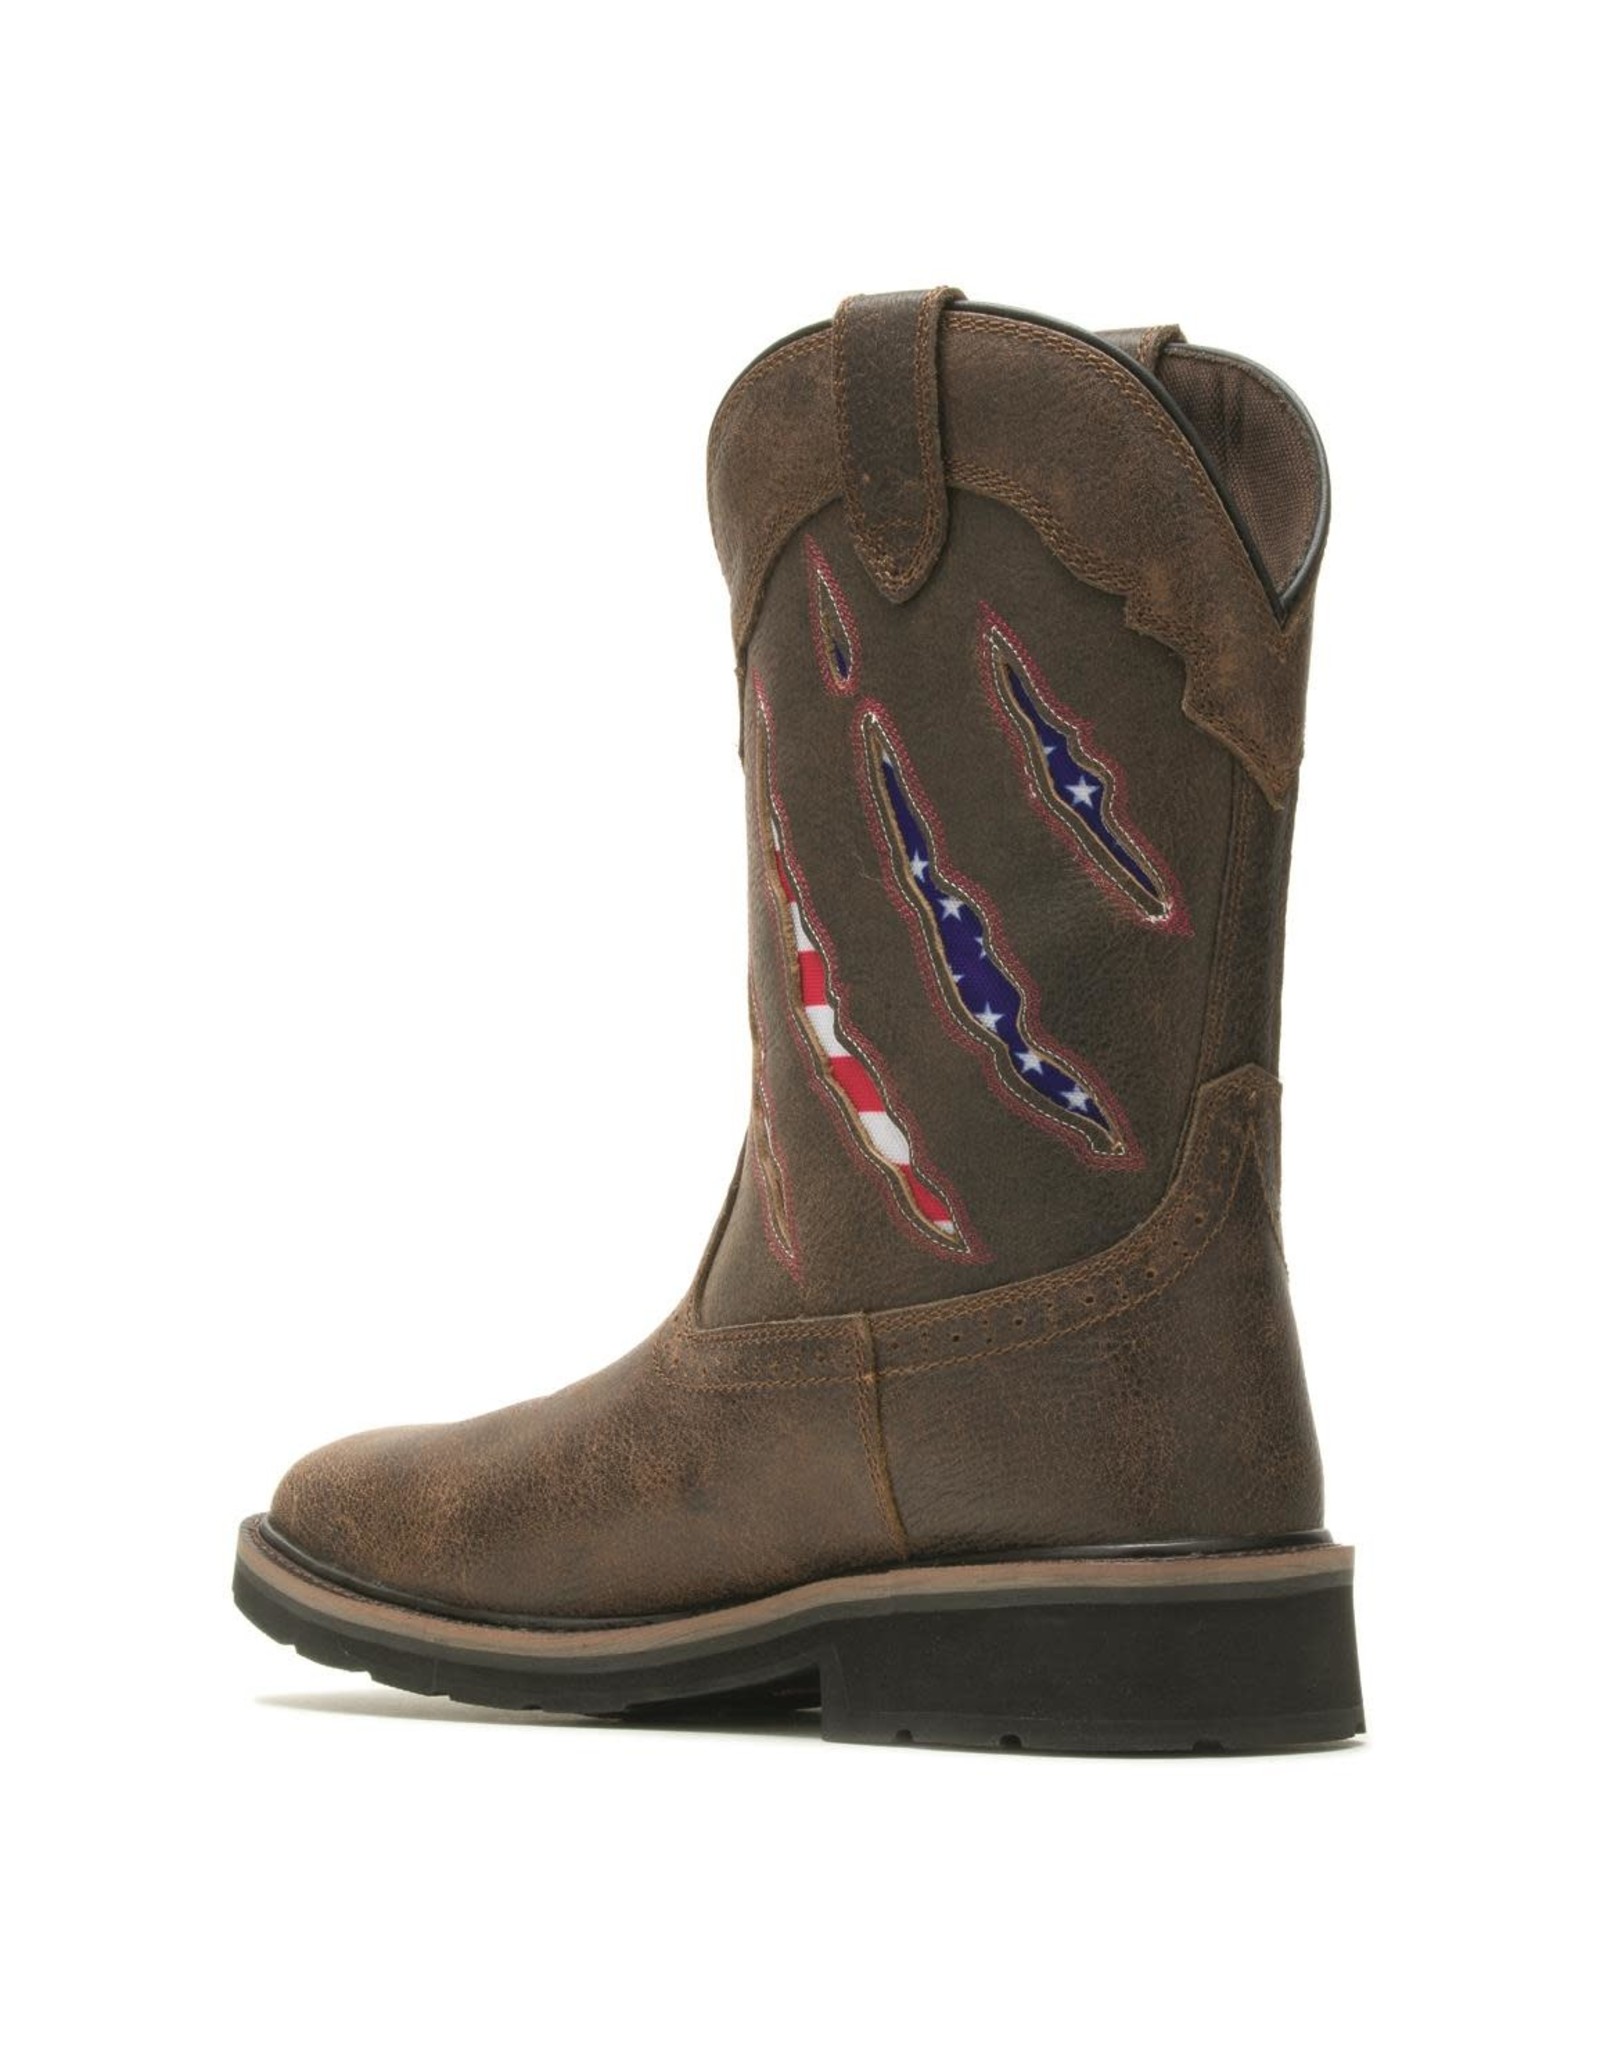 Wolverine Men’s Rancher American Flag Claw Steel Toe W201218 Work Boots